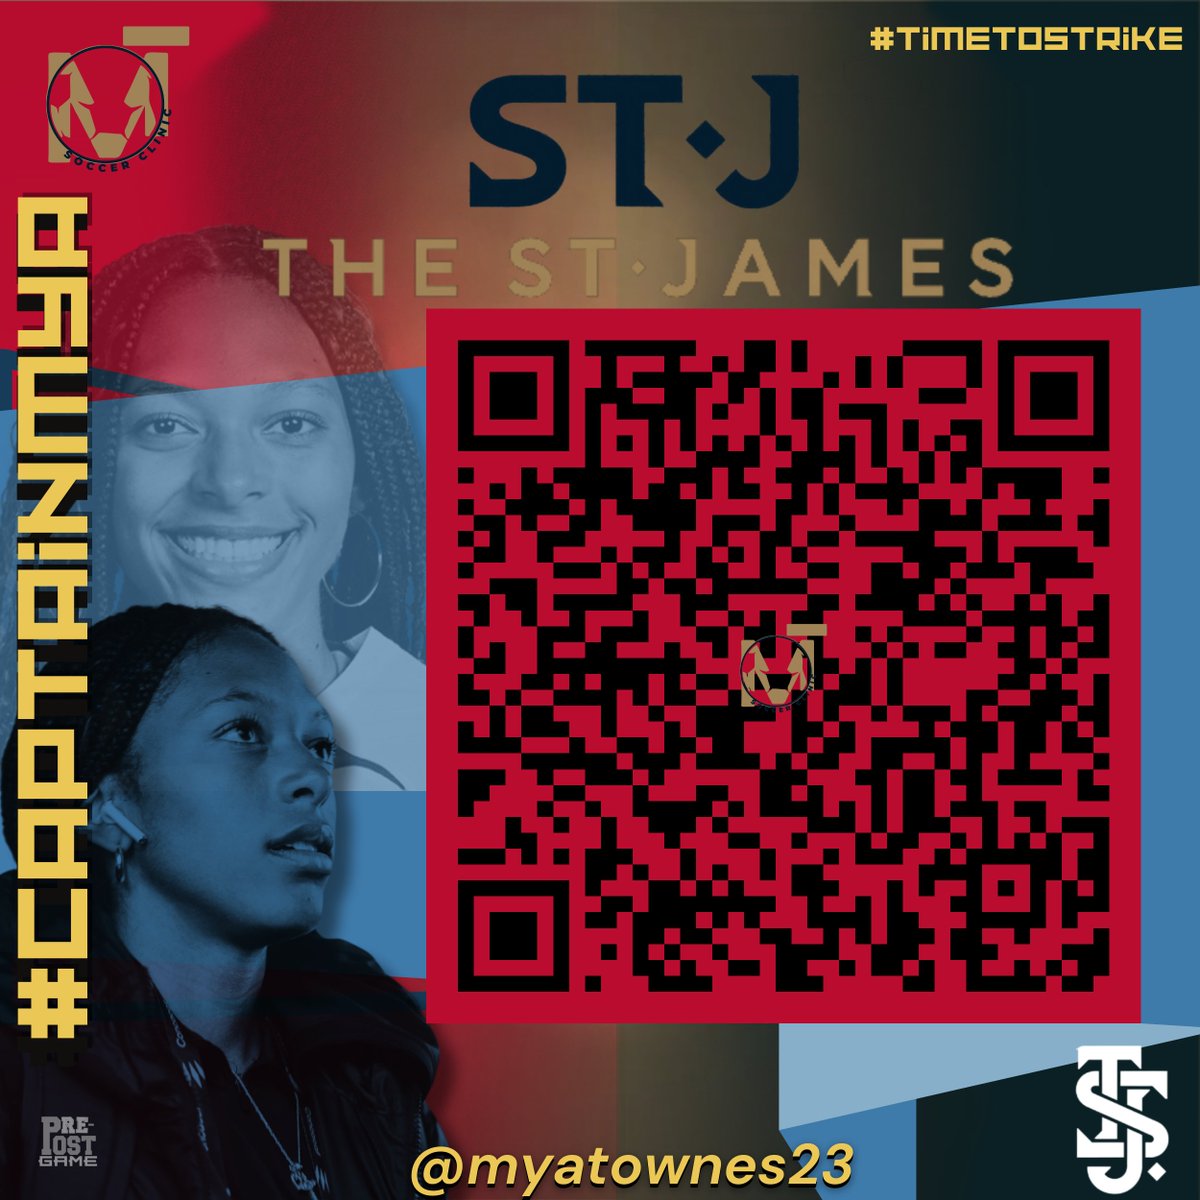 #CaptainMya @Myatownes23
#TimeToStrike at @TheStJames 
👇🏾 😍
First 23 kids to register will be complimentary using code MT23. SPOTS ARE LIMITED ' The ST.James  

theprepostgame.com/myatownes